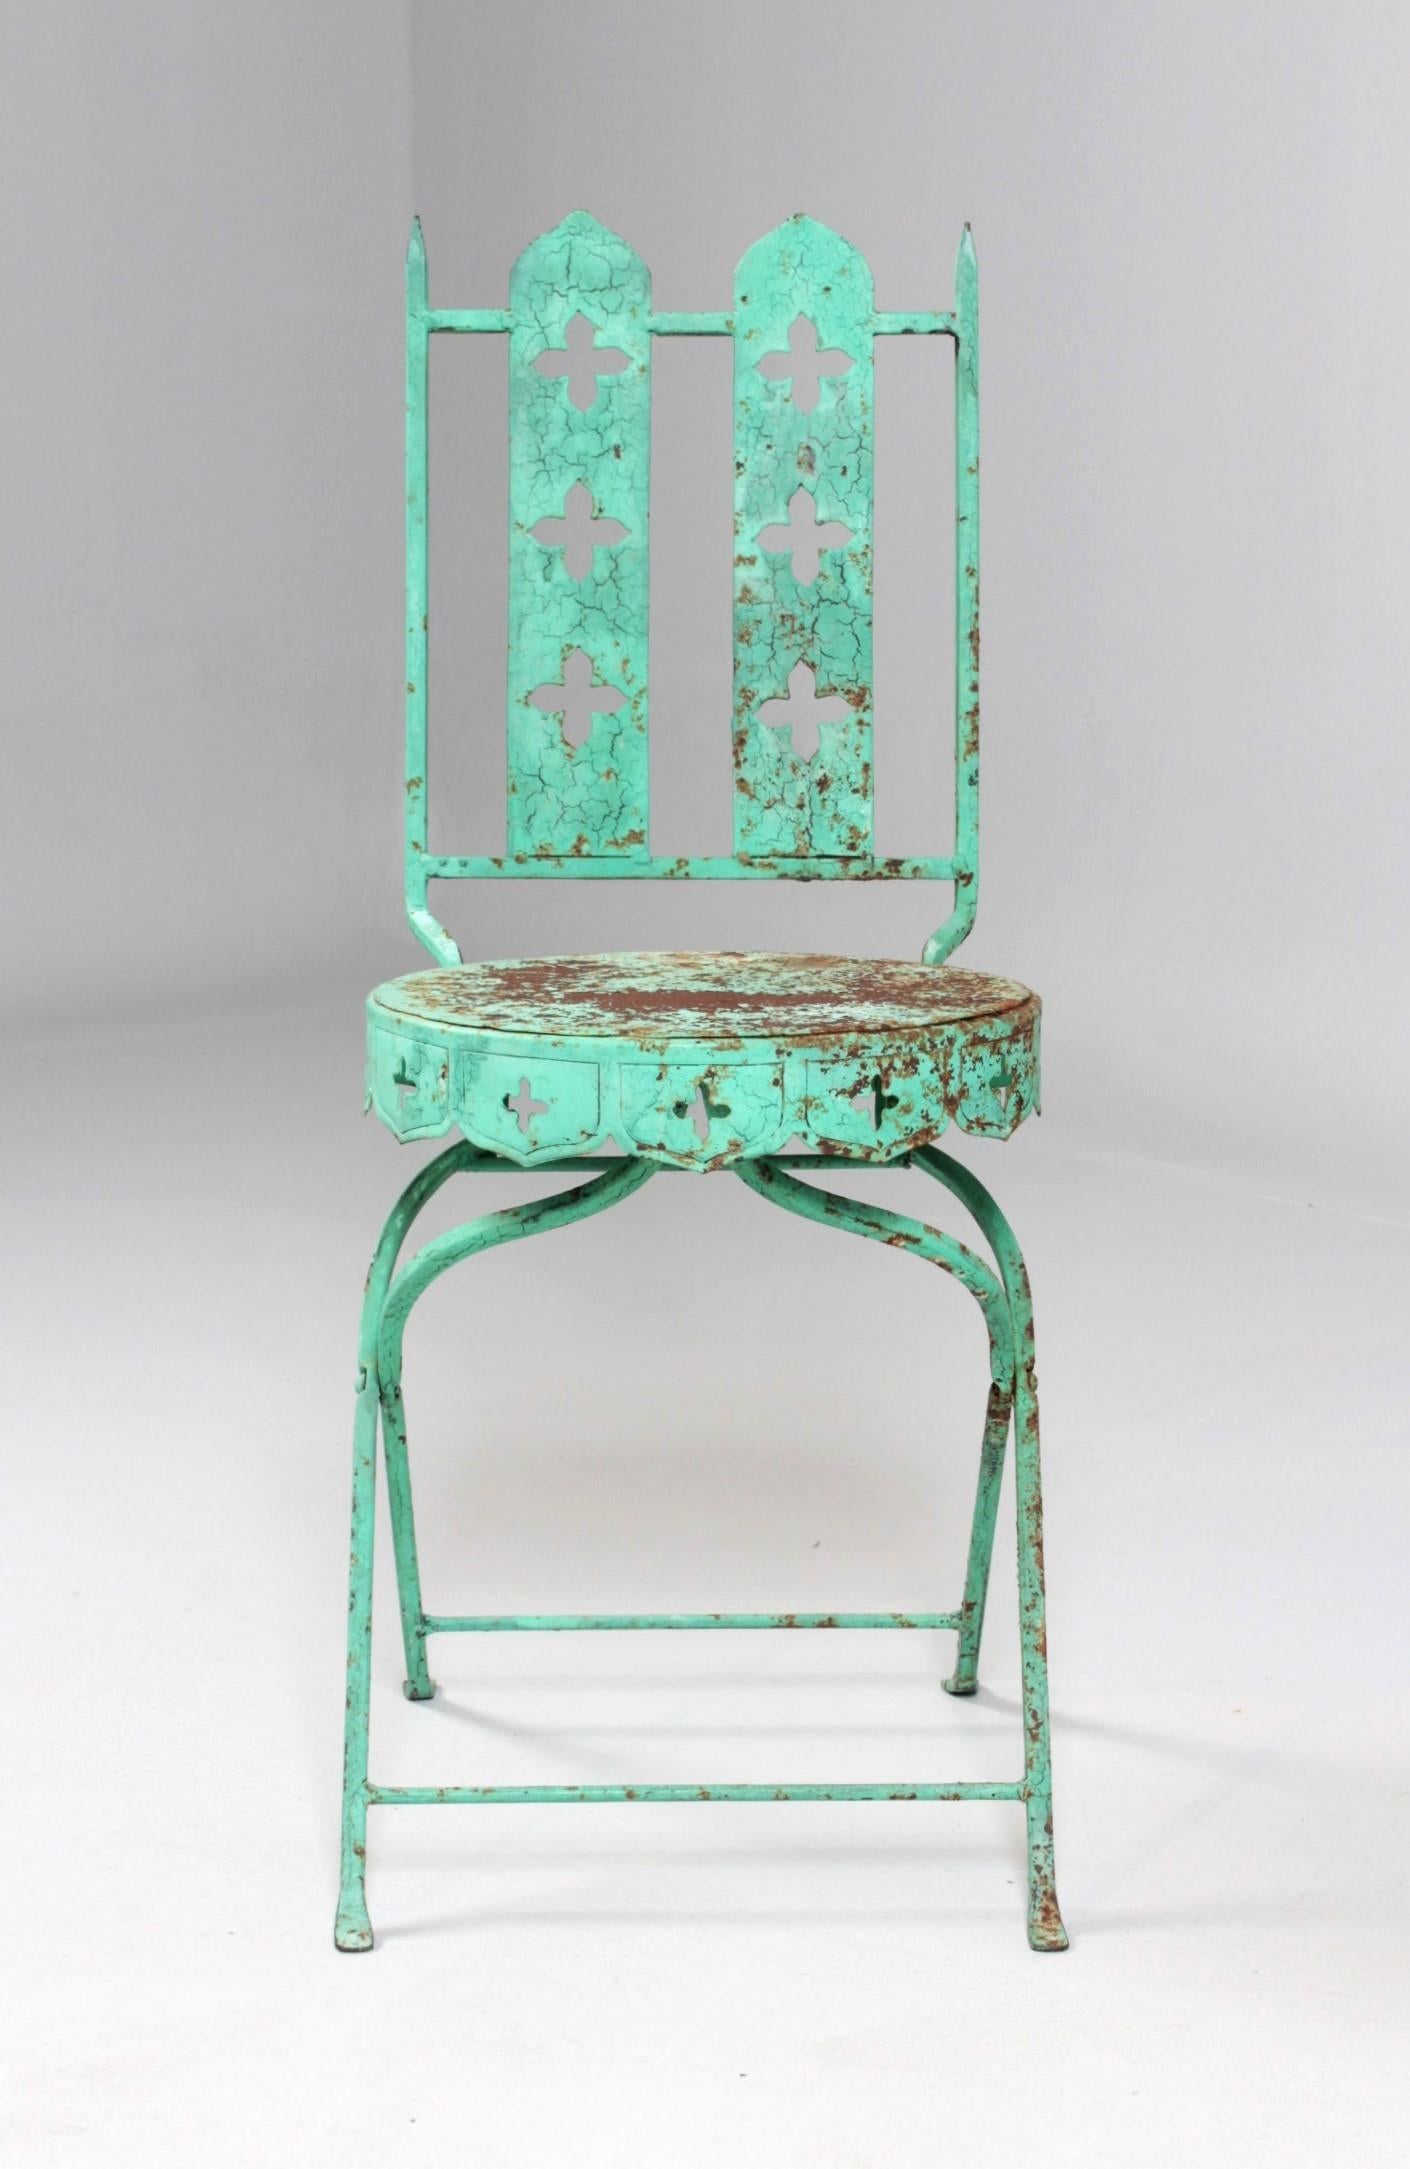 Antique or vintage garden chair in neo Gothic style. 
The filigree legs support the round seat with circumferential downward drawn pointed arches and quatrefoils.
The same design style is reflected in the backrest.
In this way, the chair is